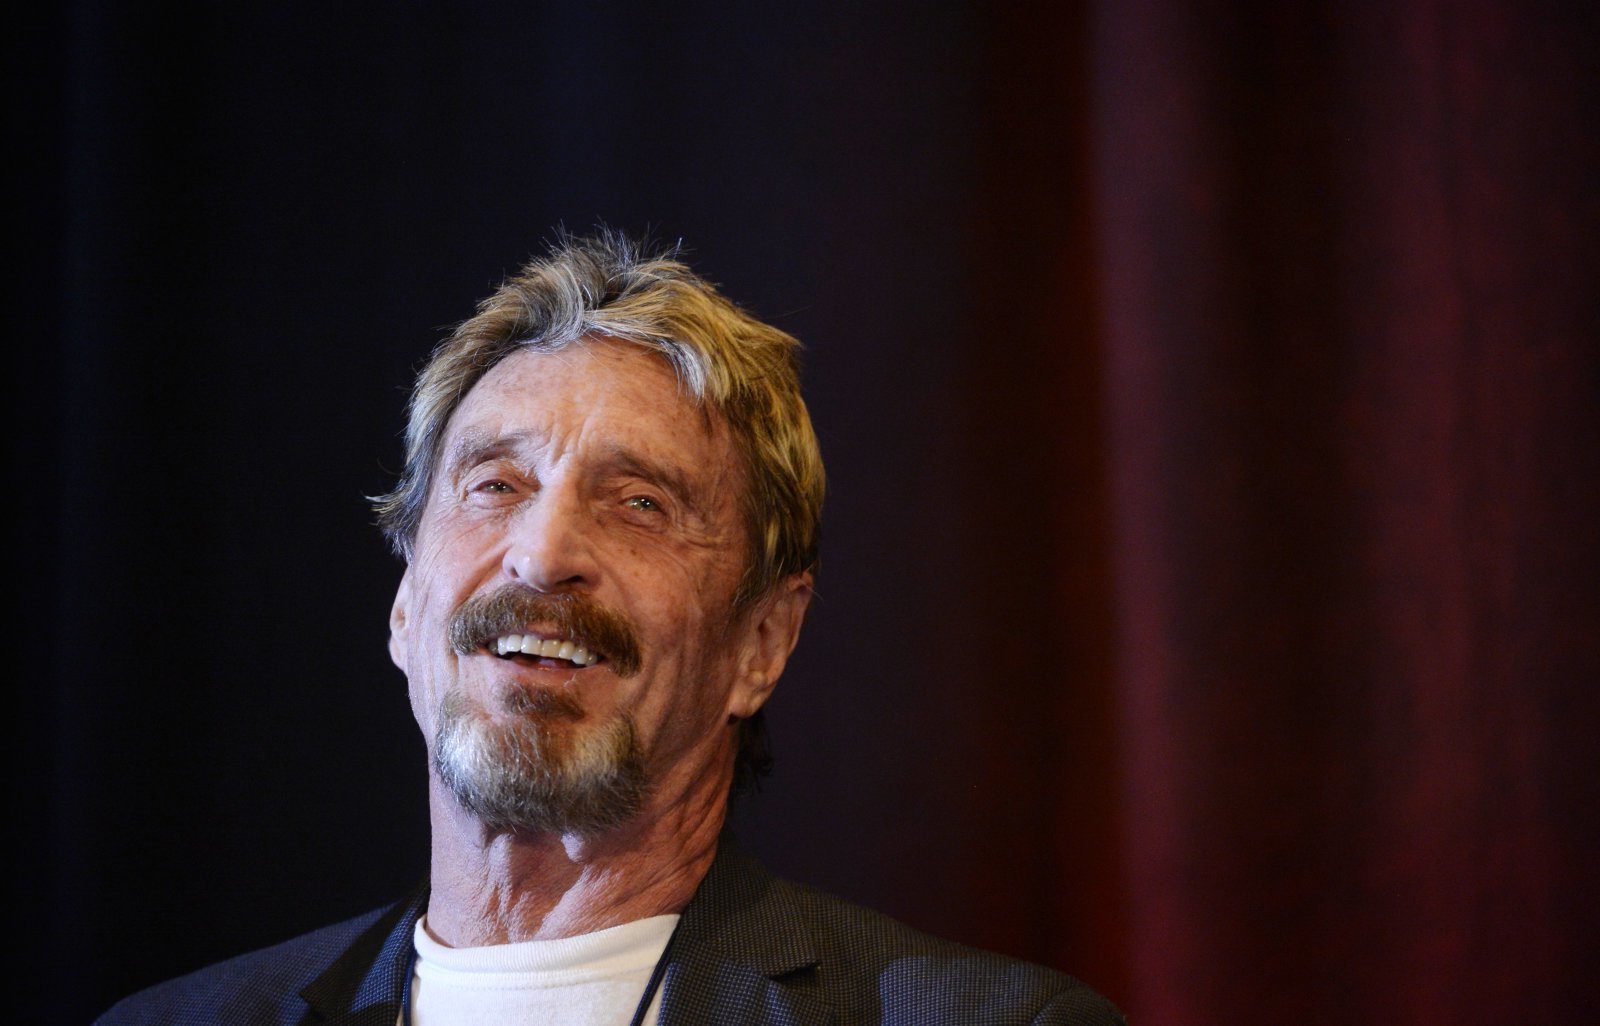 ‘People Have Panicked’ – BTC Price Rout Business as Usual for John McAfee